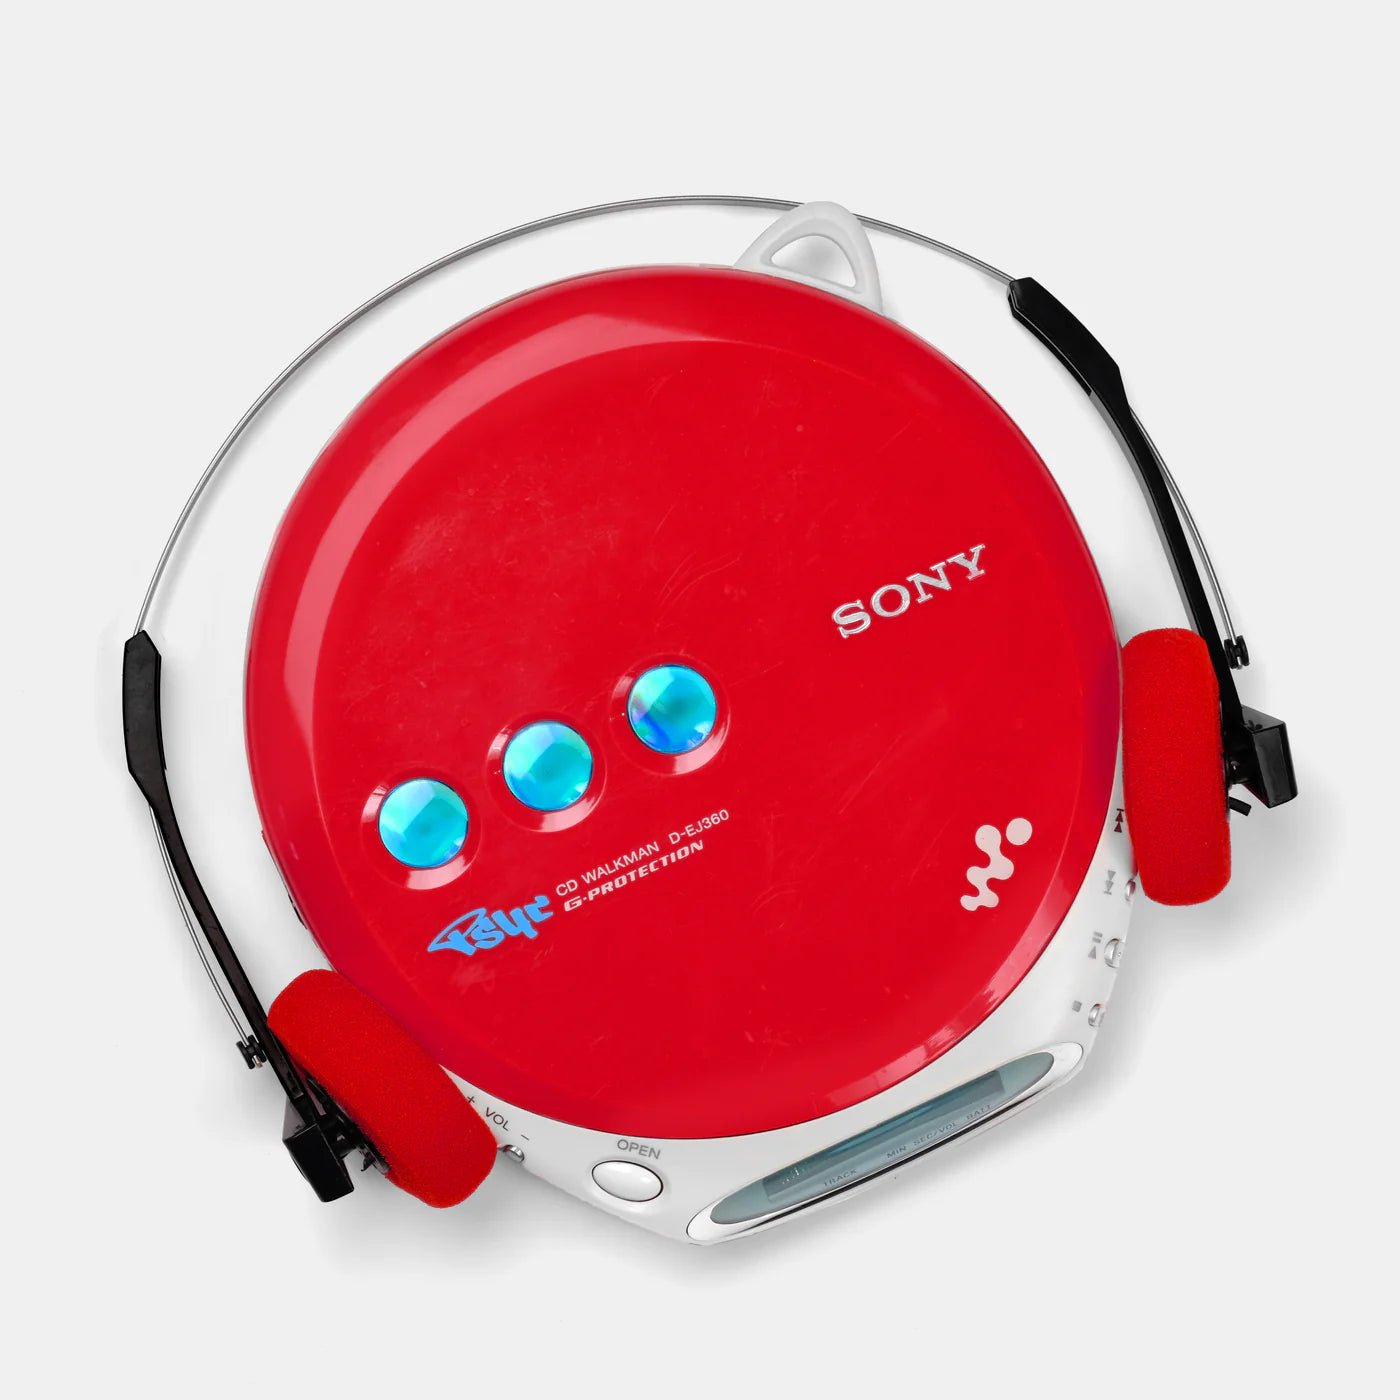 SONY PSYC D-EJ360 RED PORTABLE CD PLAYER